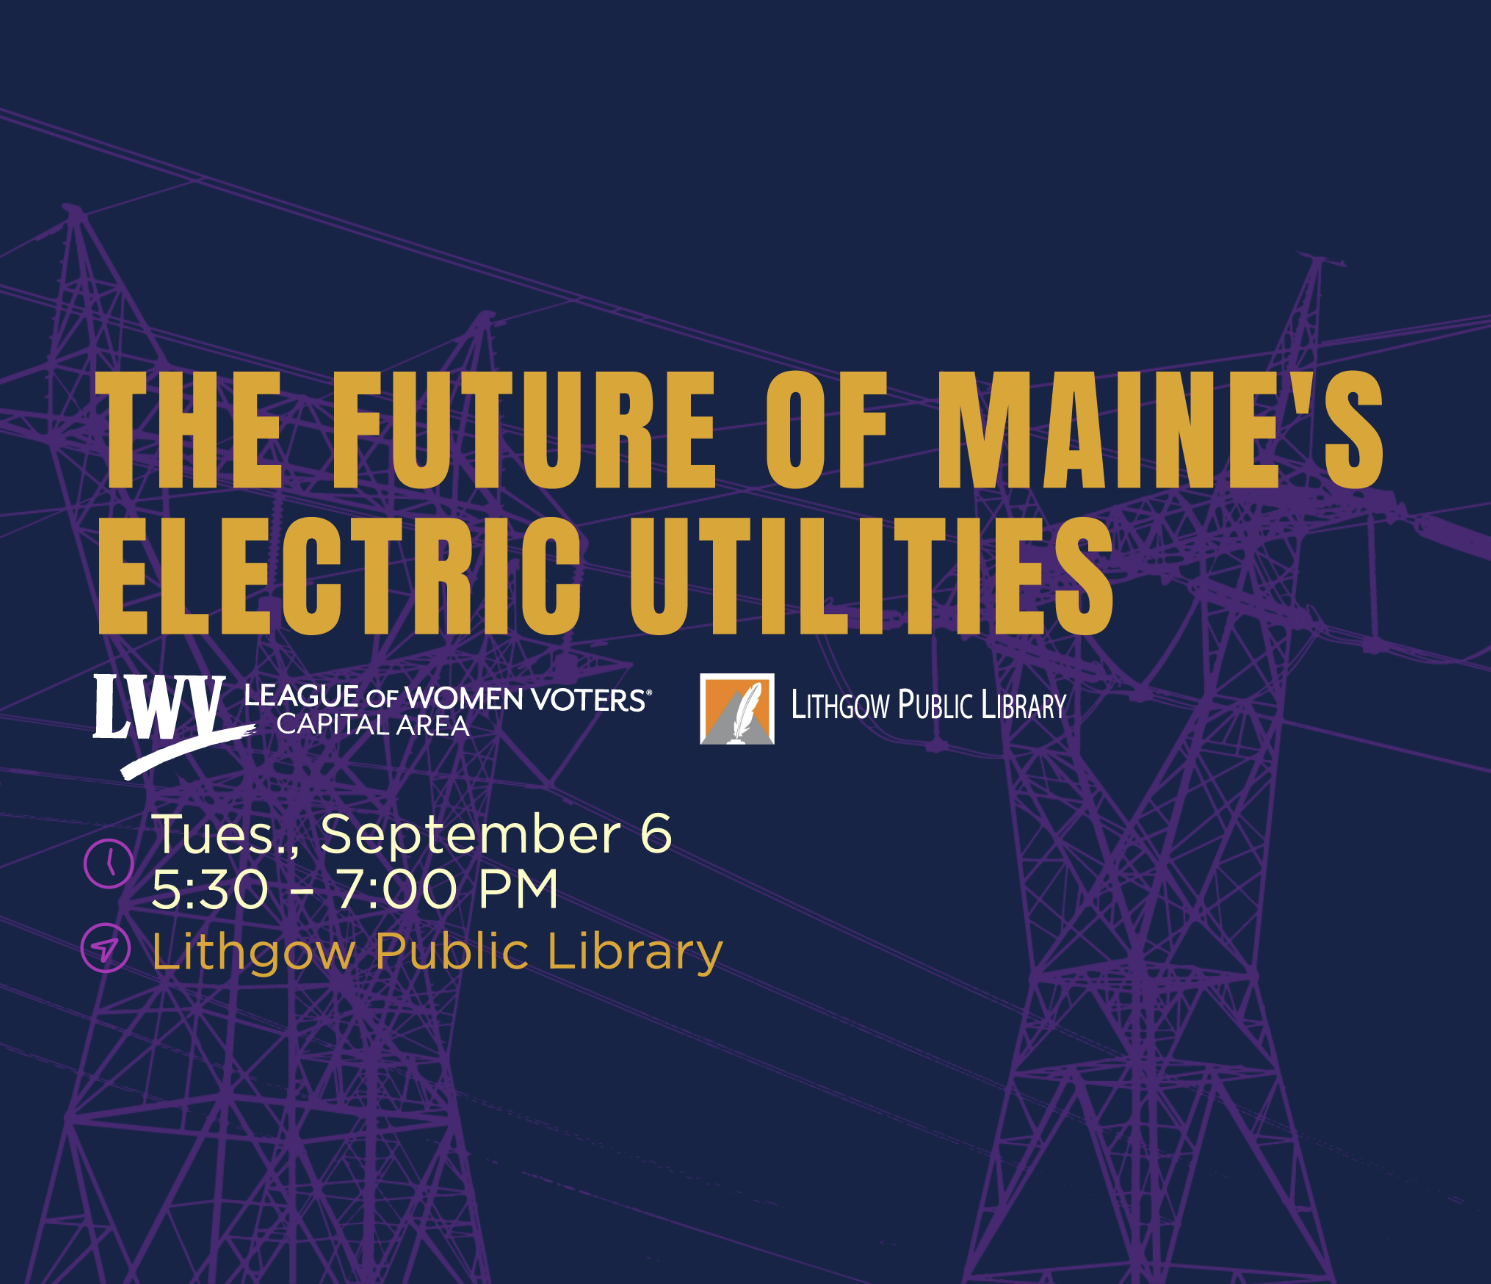 The Future of Maine’s Electric Utilities